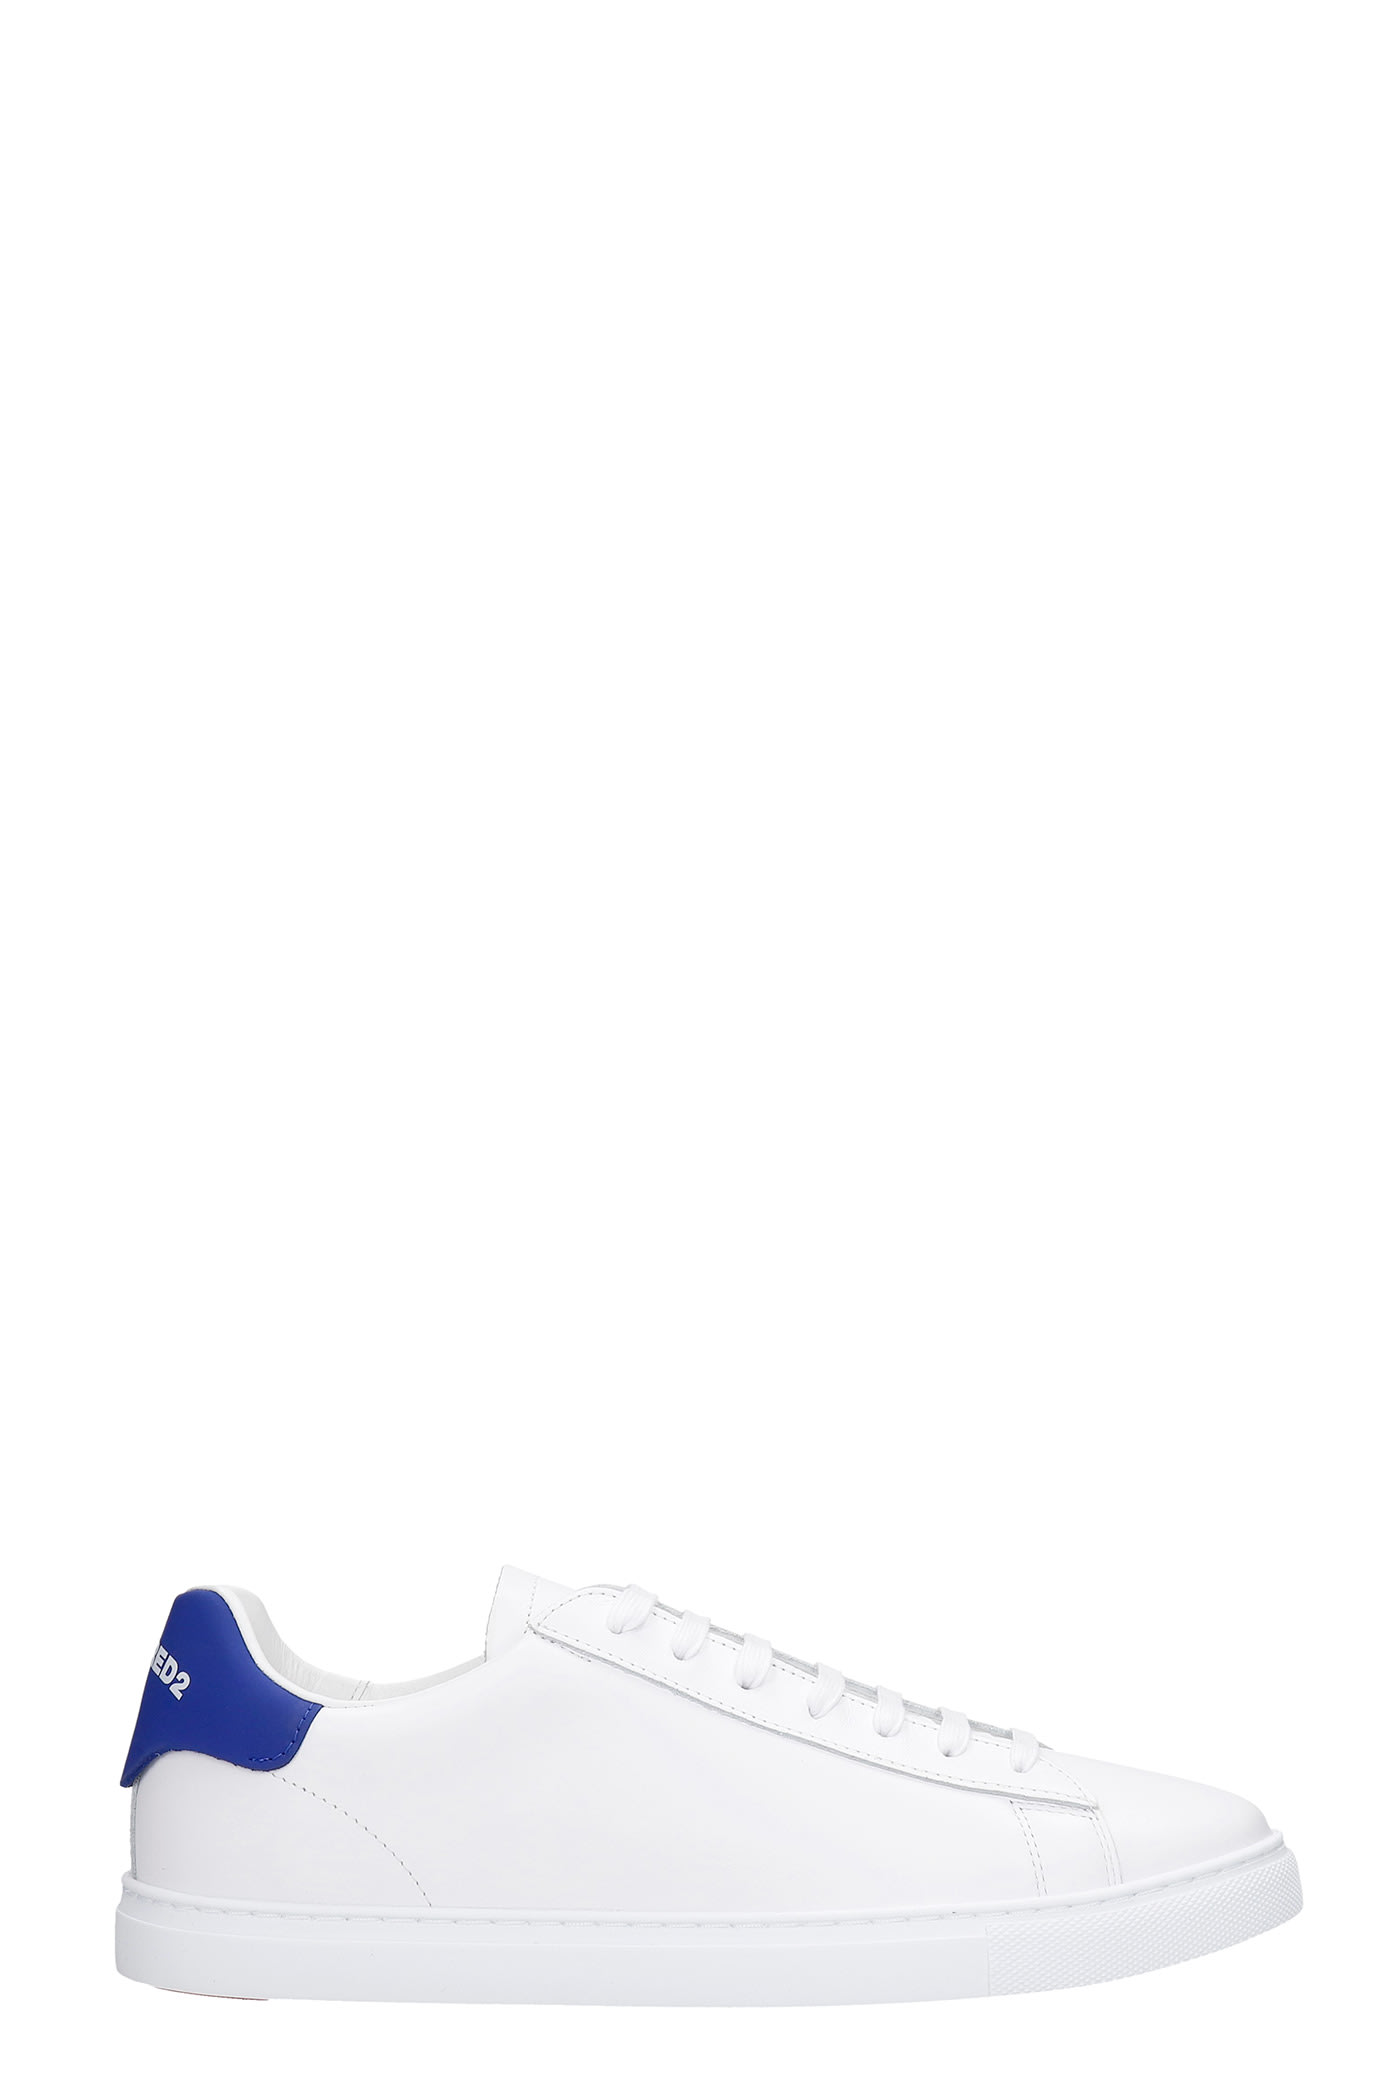 DSQUARED2 NEW TENNIS SNEAKERS IN WHITE LEATHER,SNM000511570001M328